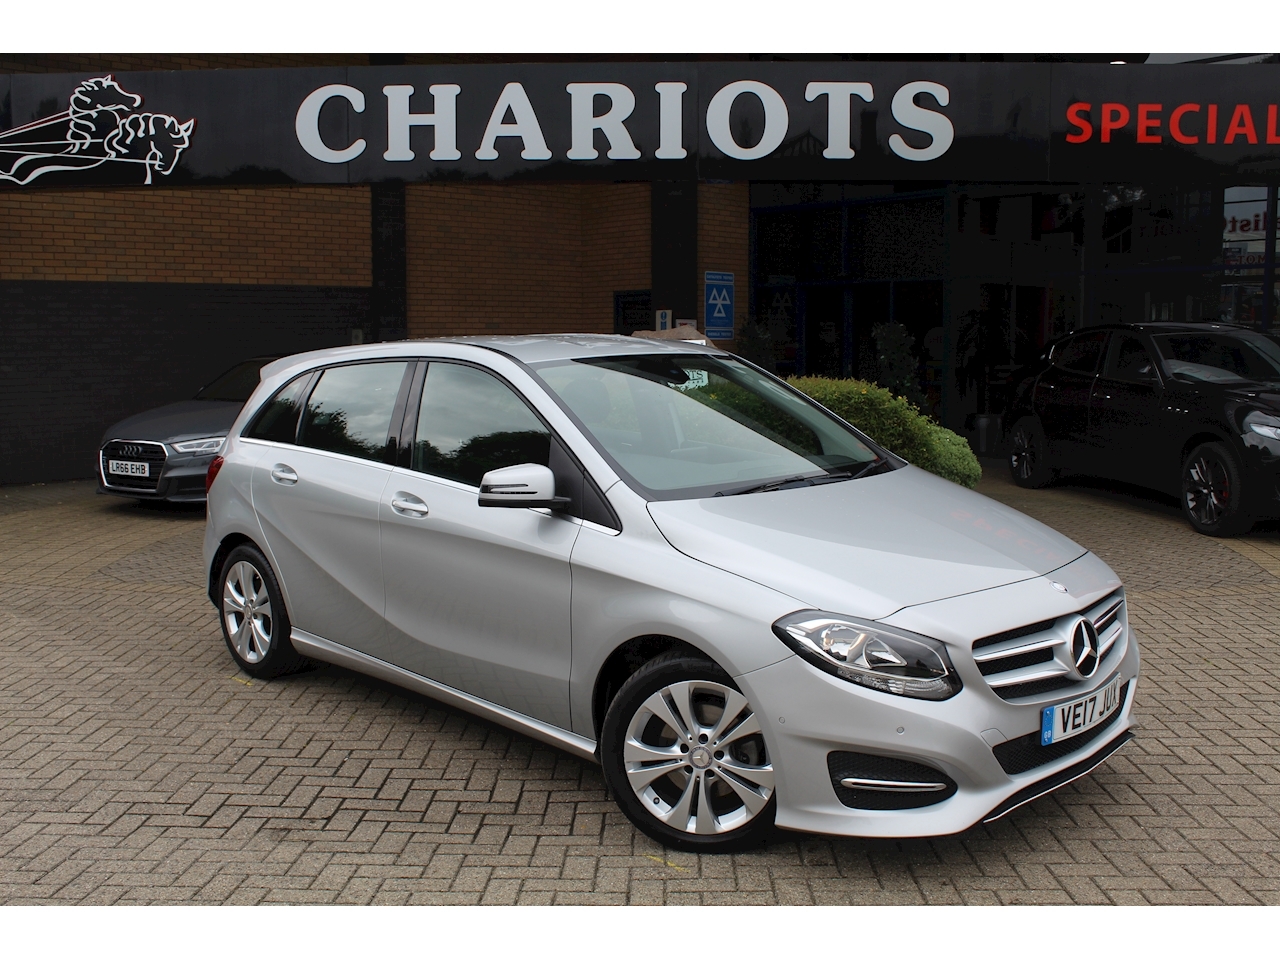 2.1 B200d Sport (Executive) MPV 5dr Diesel 7G-DCT (s/s) (136 ps)